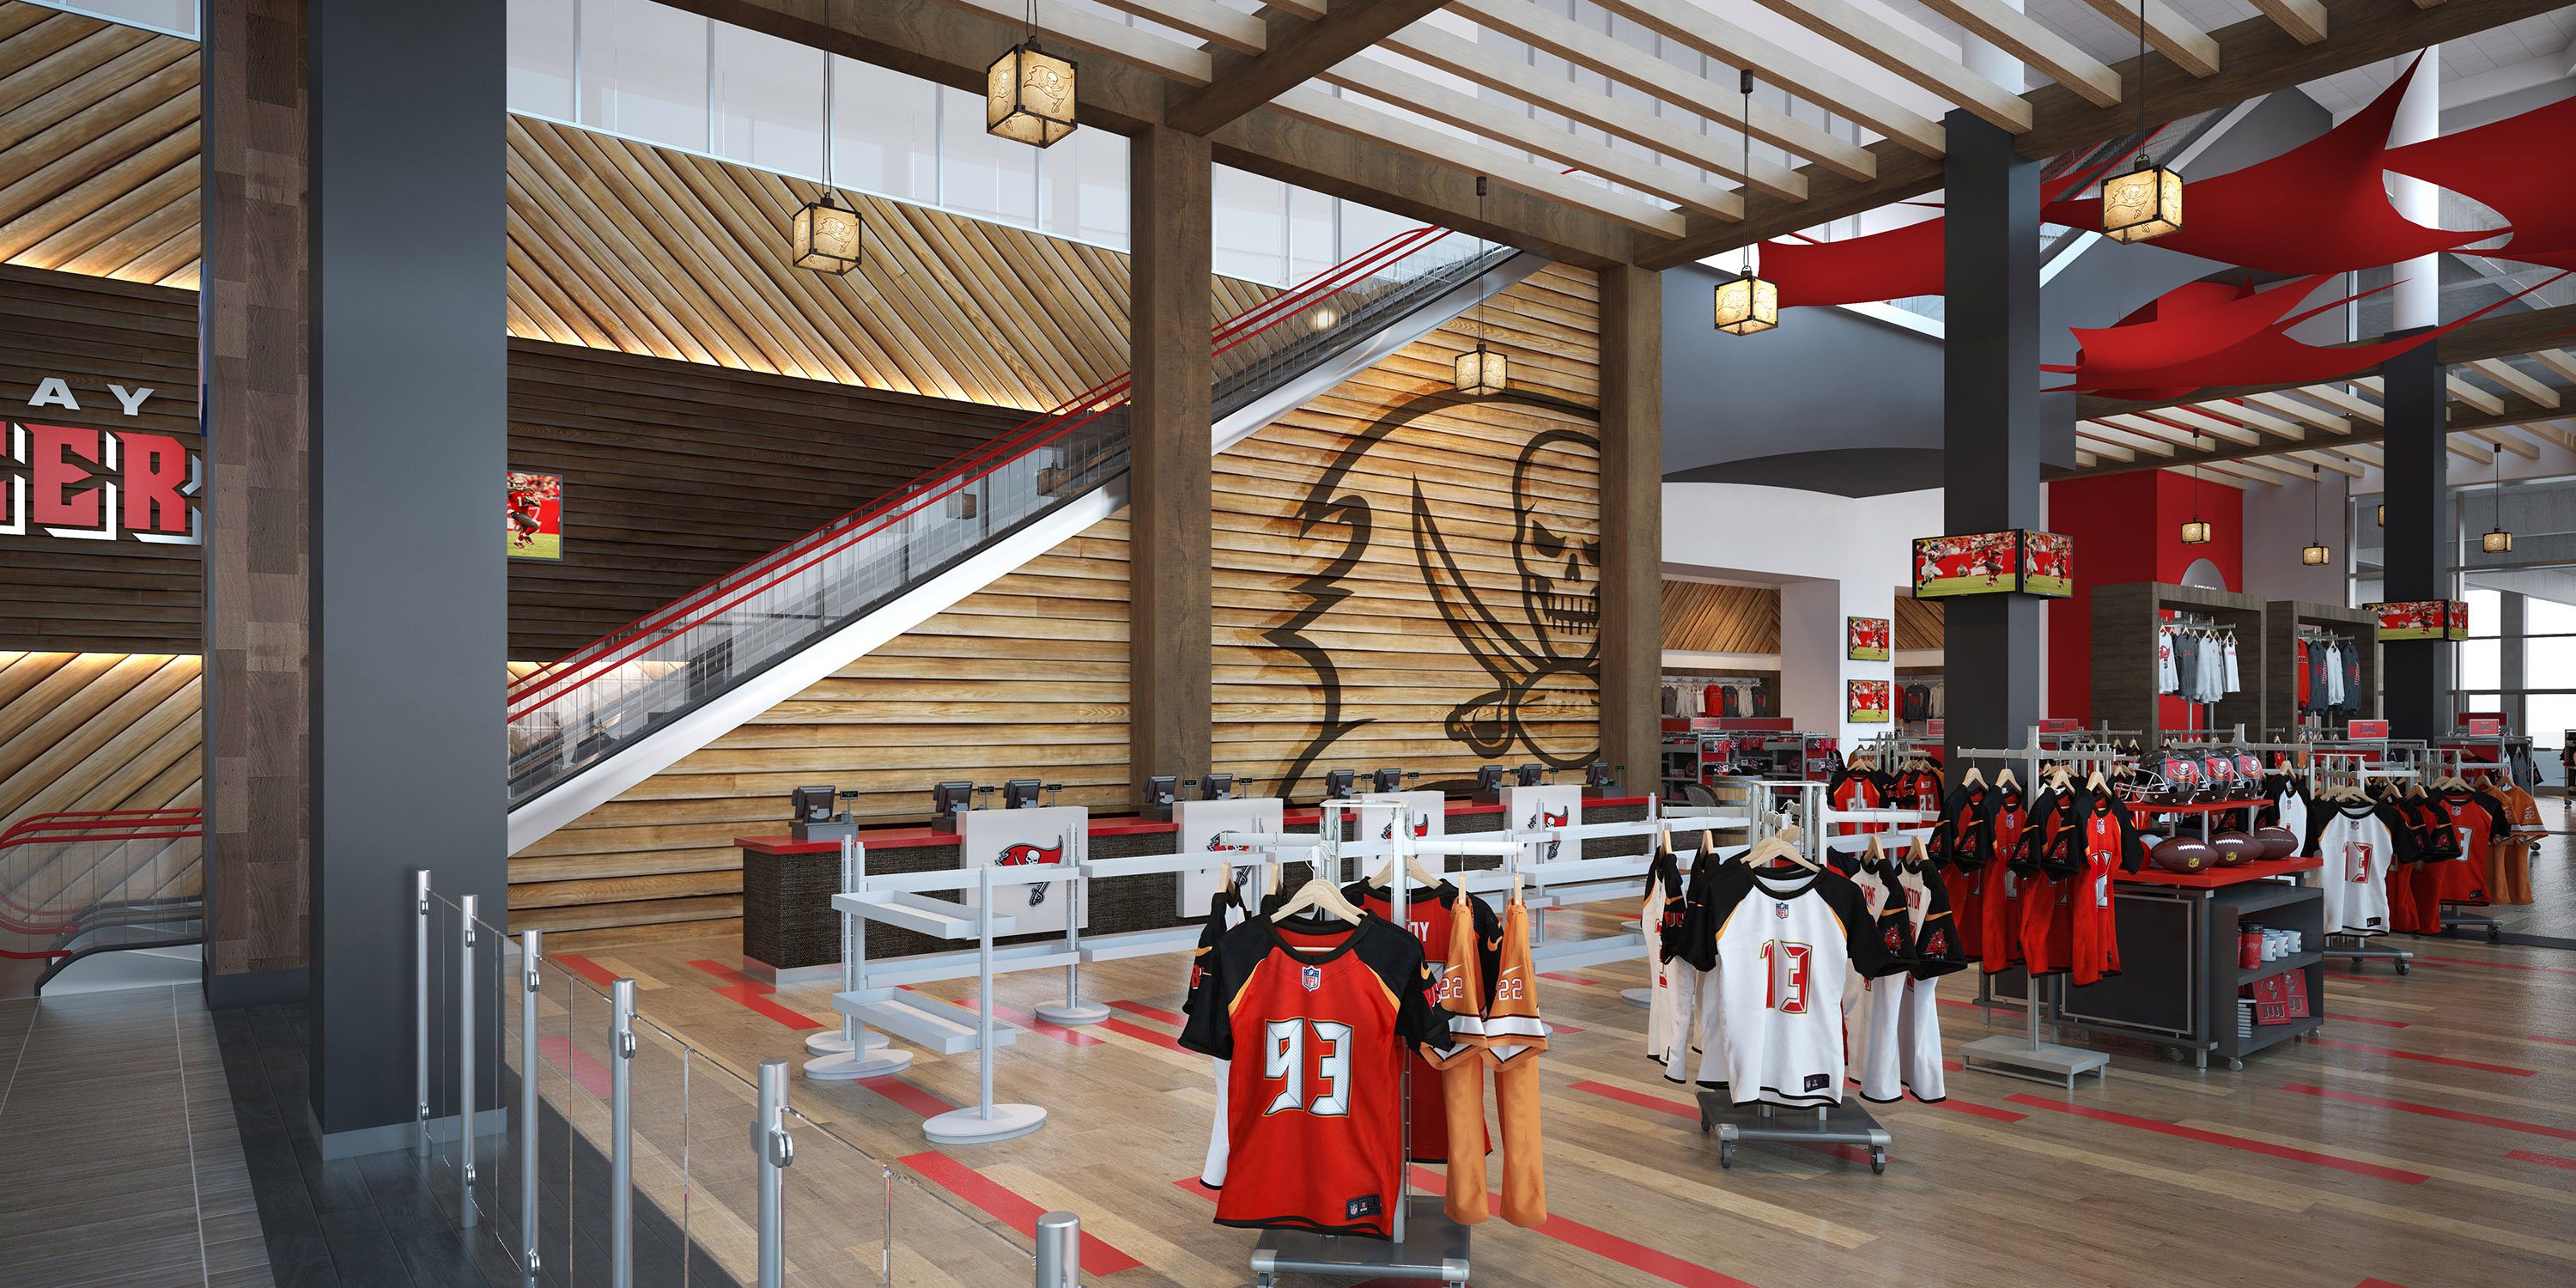 tampa bay buccaneers store in tampa fl